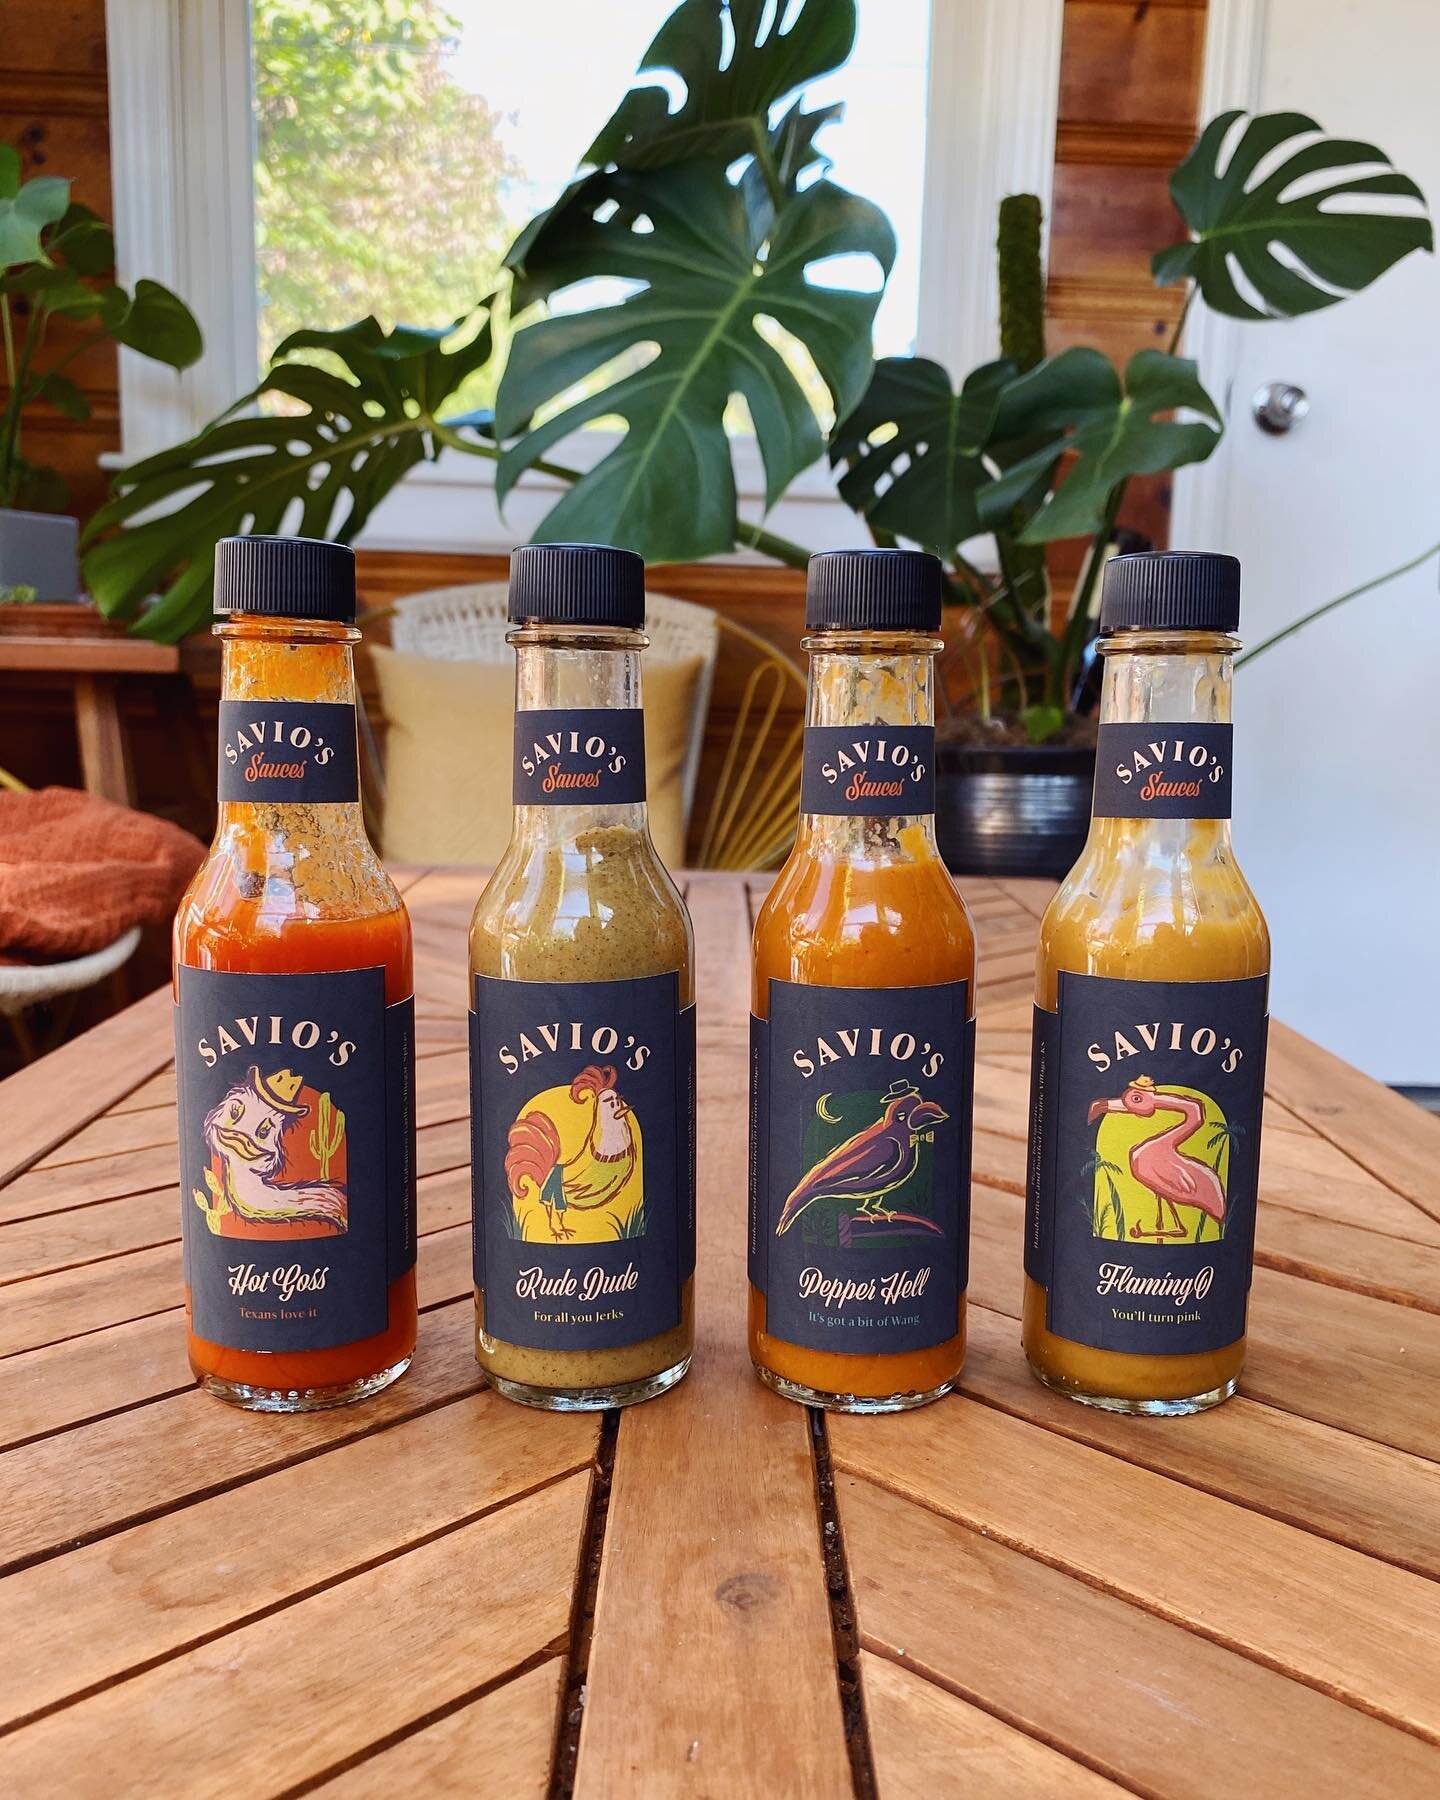 The story: Savio&rsquo;s Sauces started while we lived in Prairie Village, KS in 2021 as a pandemic hobby. We started a garden with thriving pepper plants and with a surplus of peppers. We also had friends that sent us peppers from their garden as we